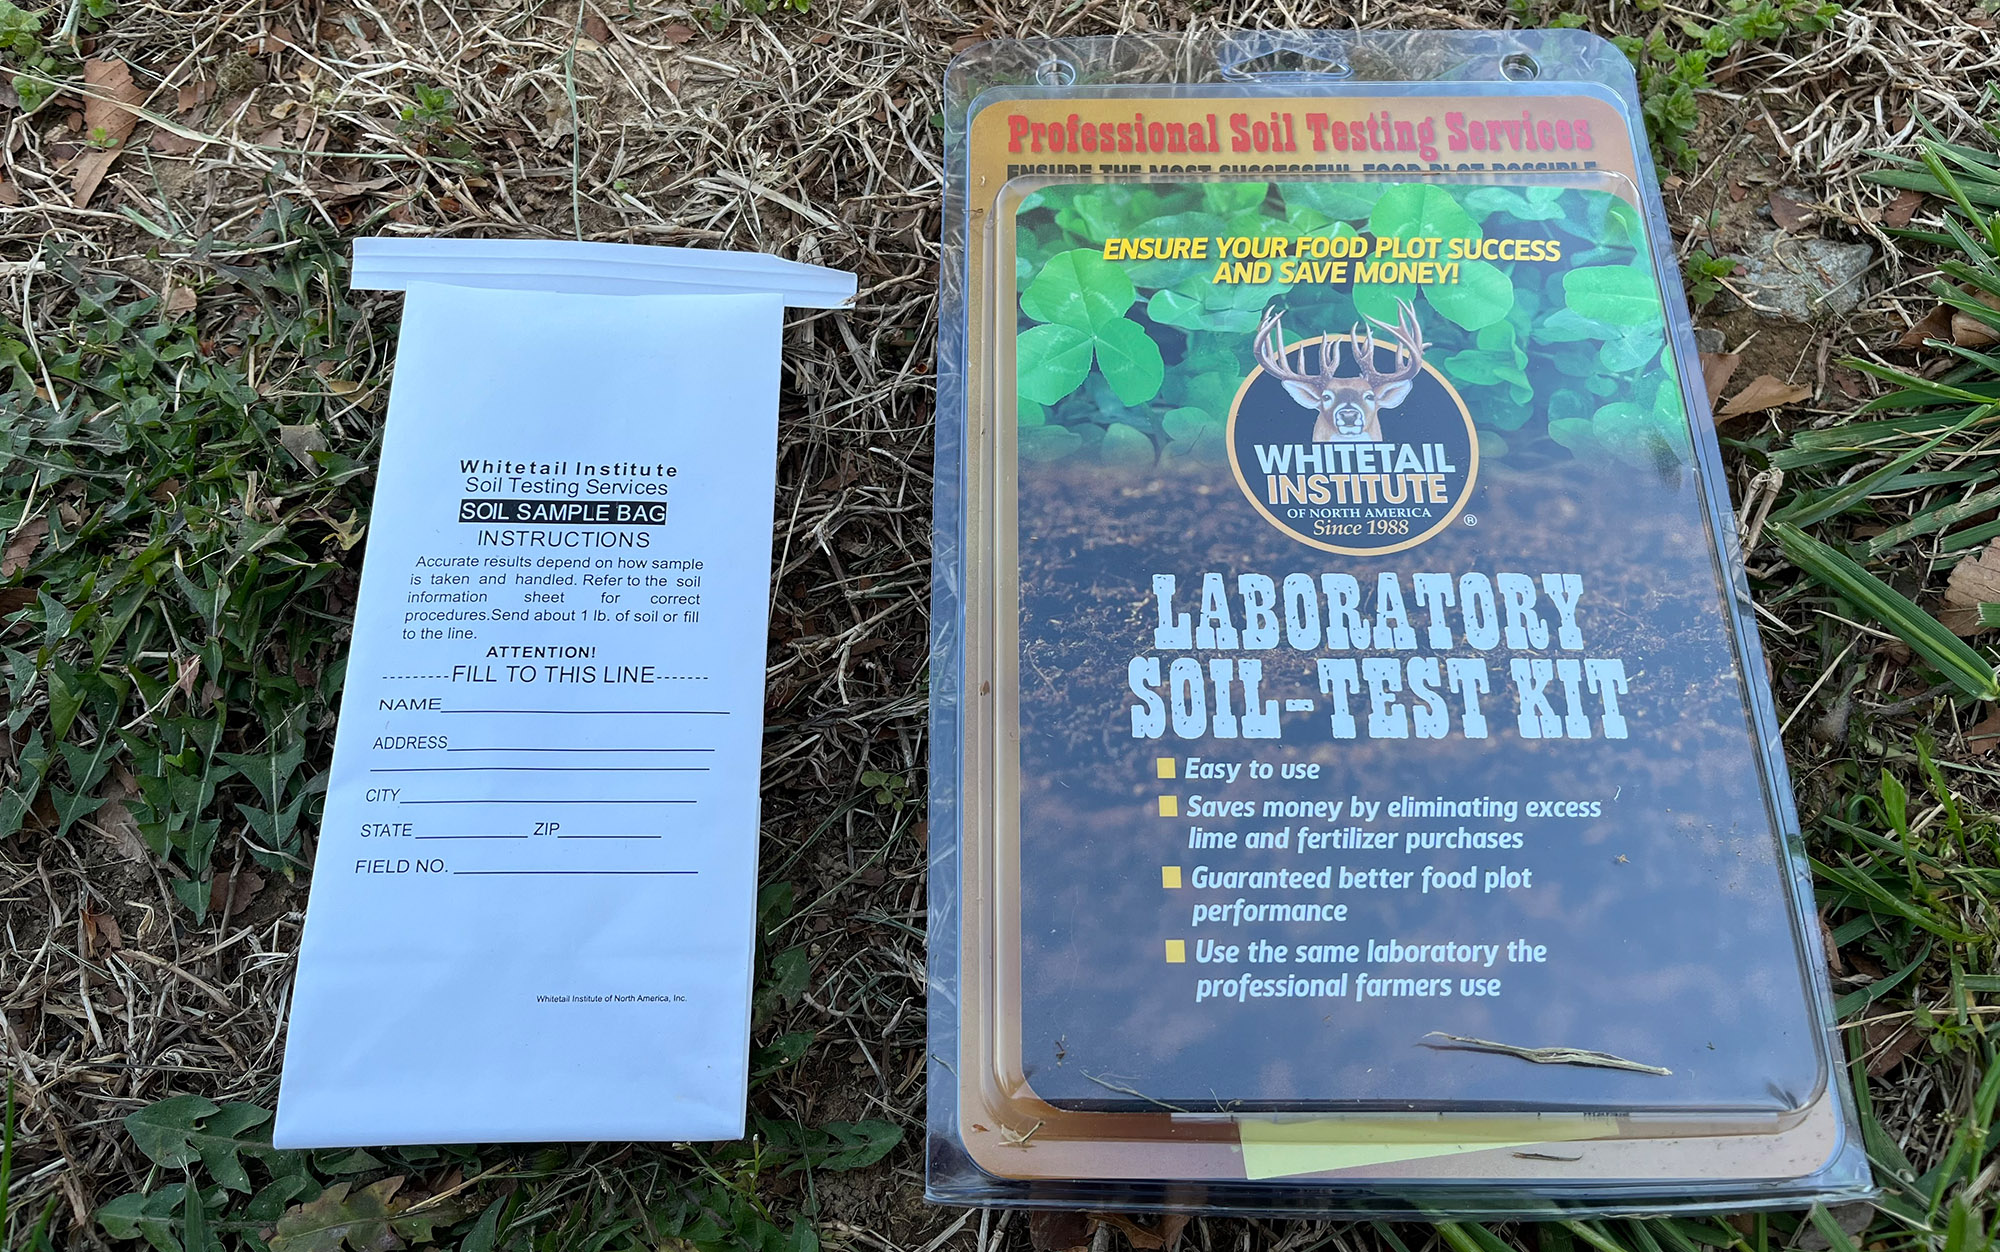 After sending in your Whitetail Institute Laboratory Soil Test Kit sample, you'll wait a week for highly accurate results.